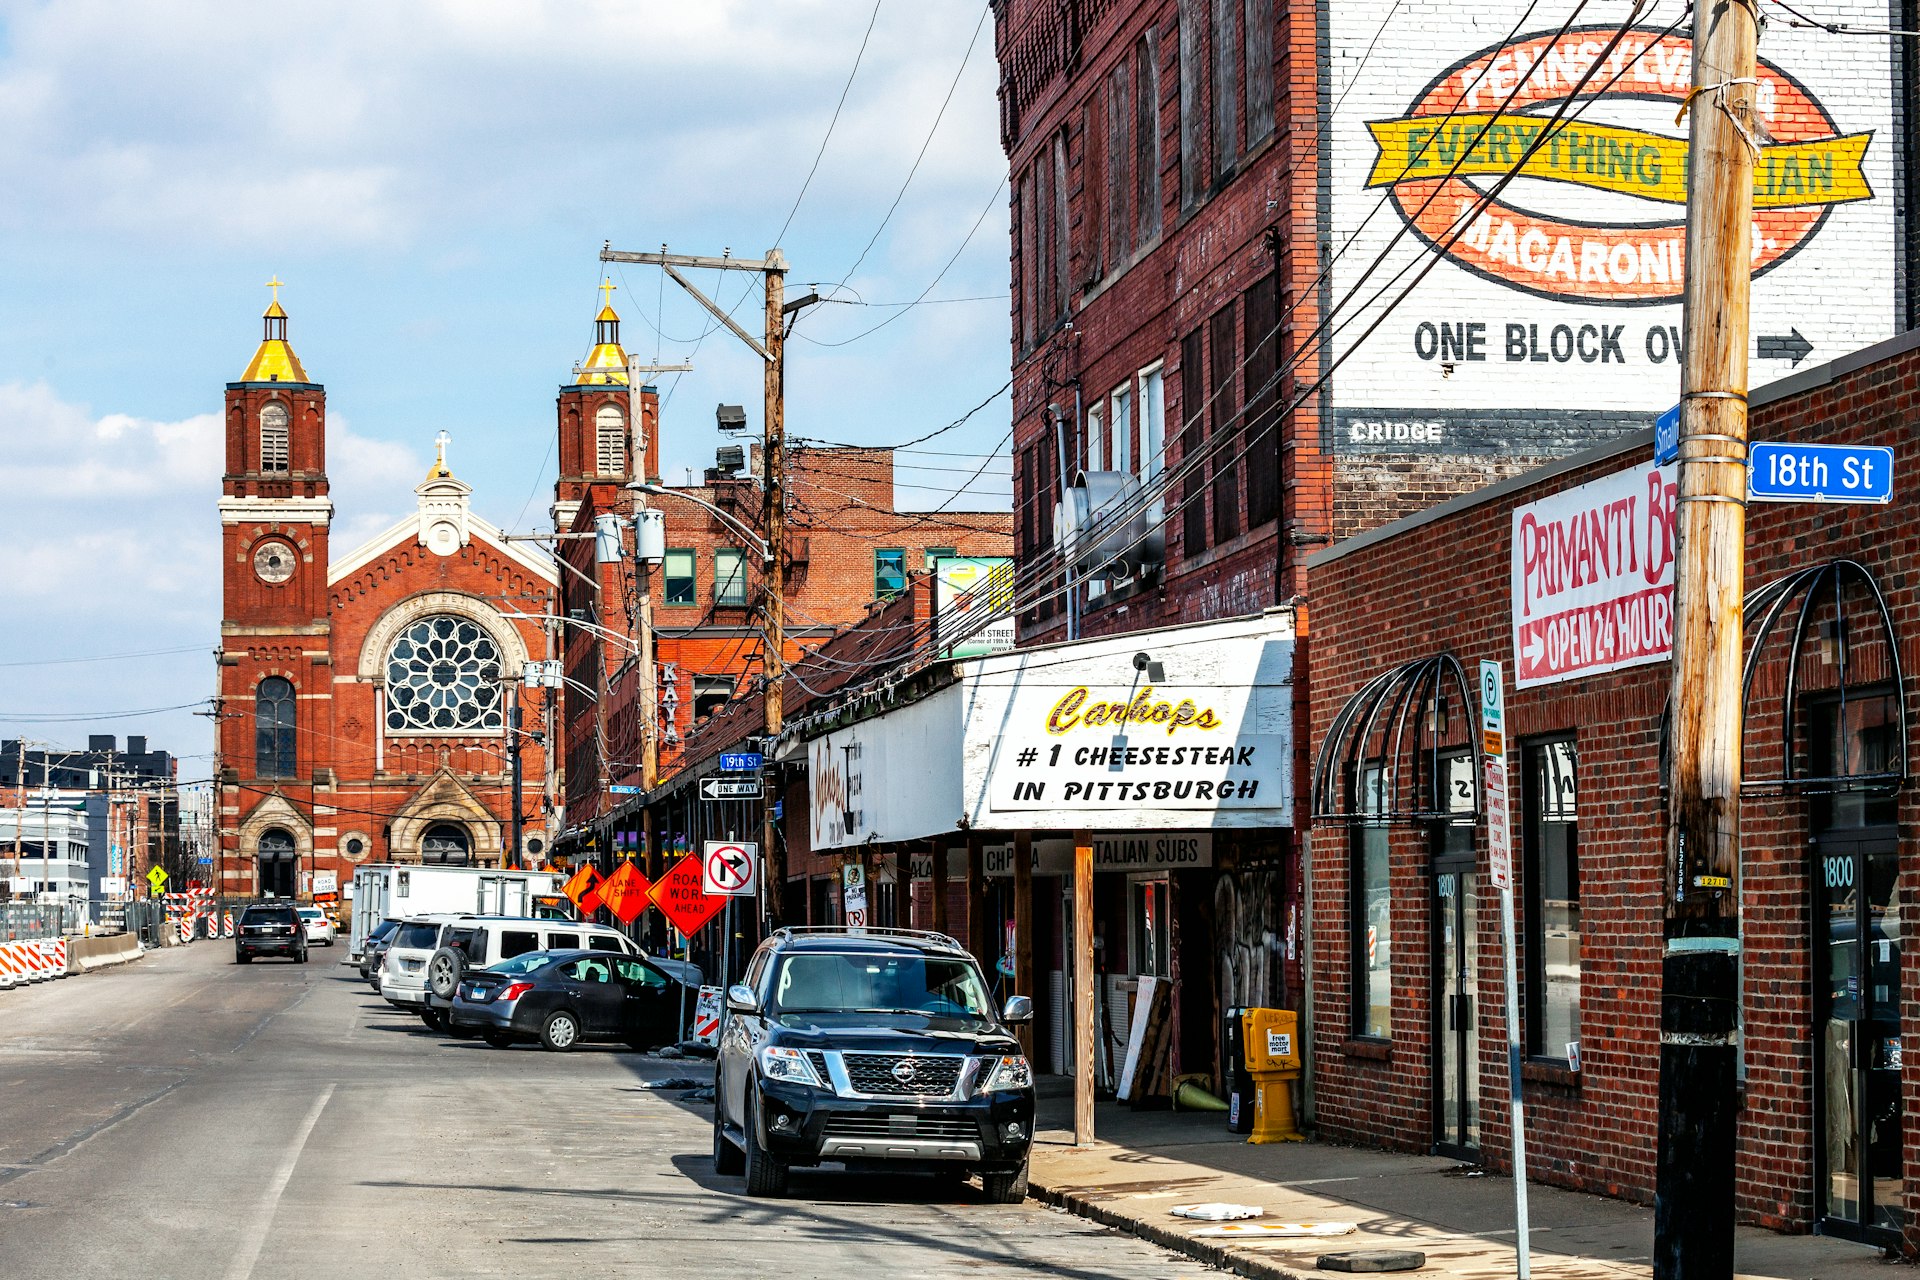 A row of brick businesses line the street in an area known as The Strip in Pittsburgh. Towards the end of the street is a light brown brick church. 